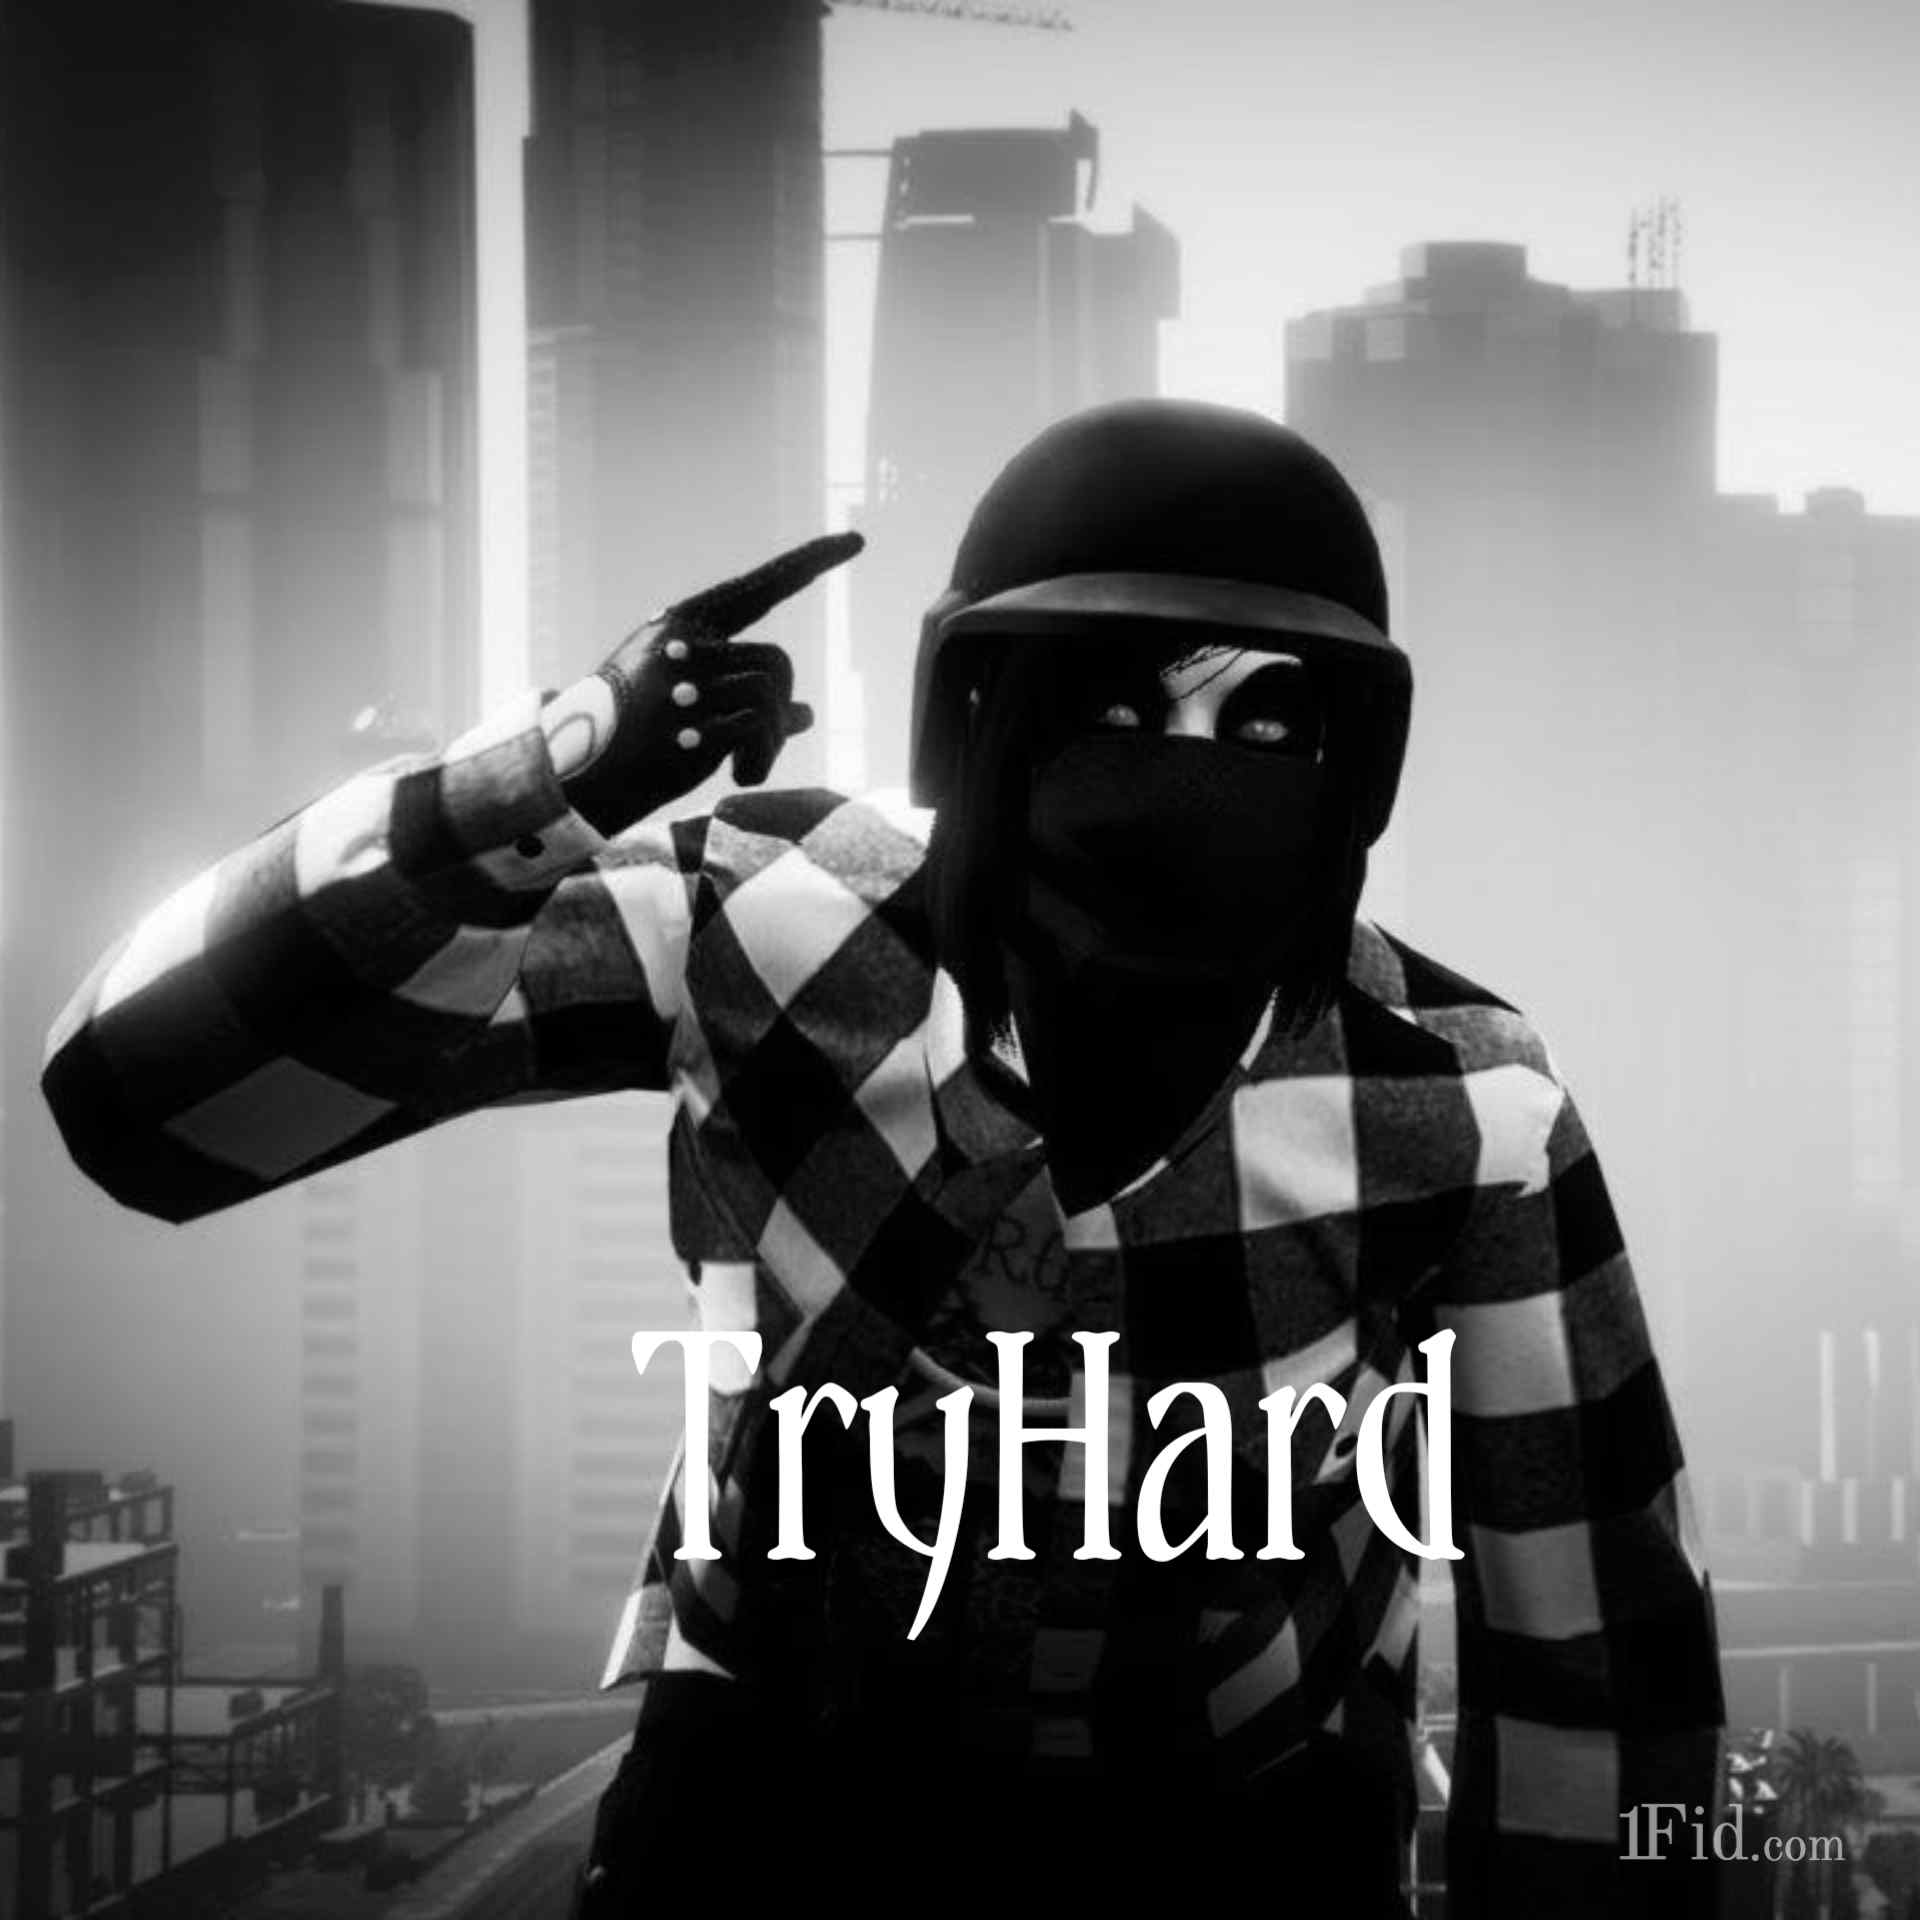 GTA 5 (Grand Theft Auto V) Tryhard Profile Pics [Best Collection]